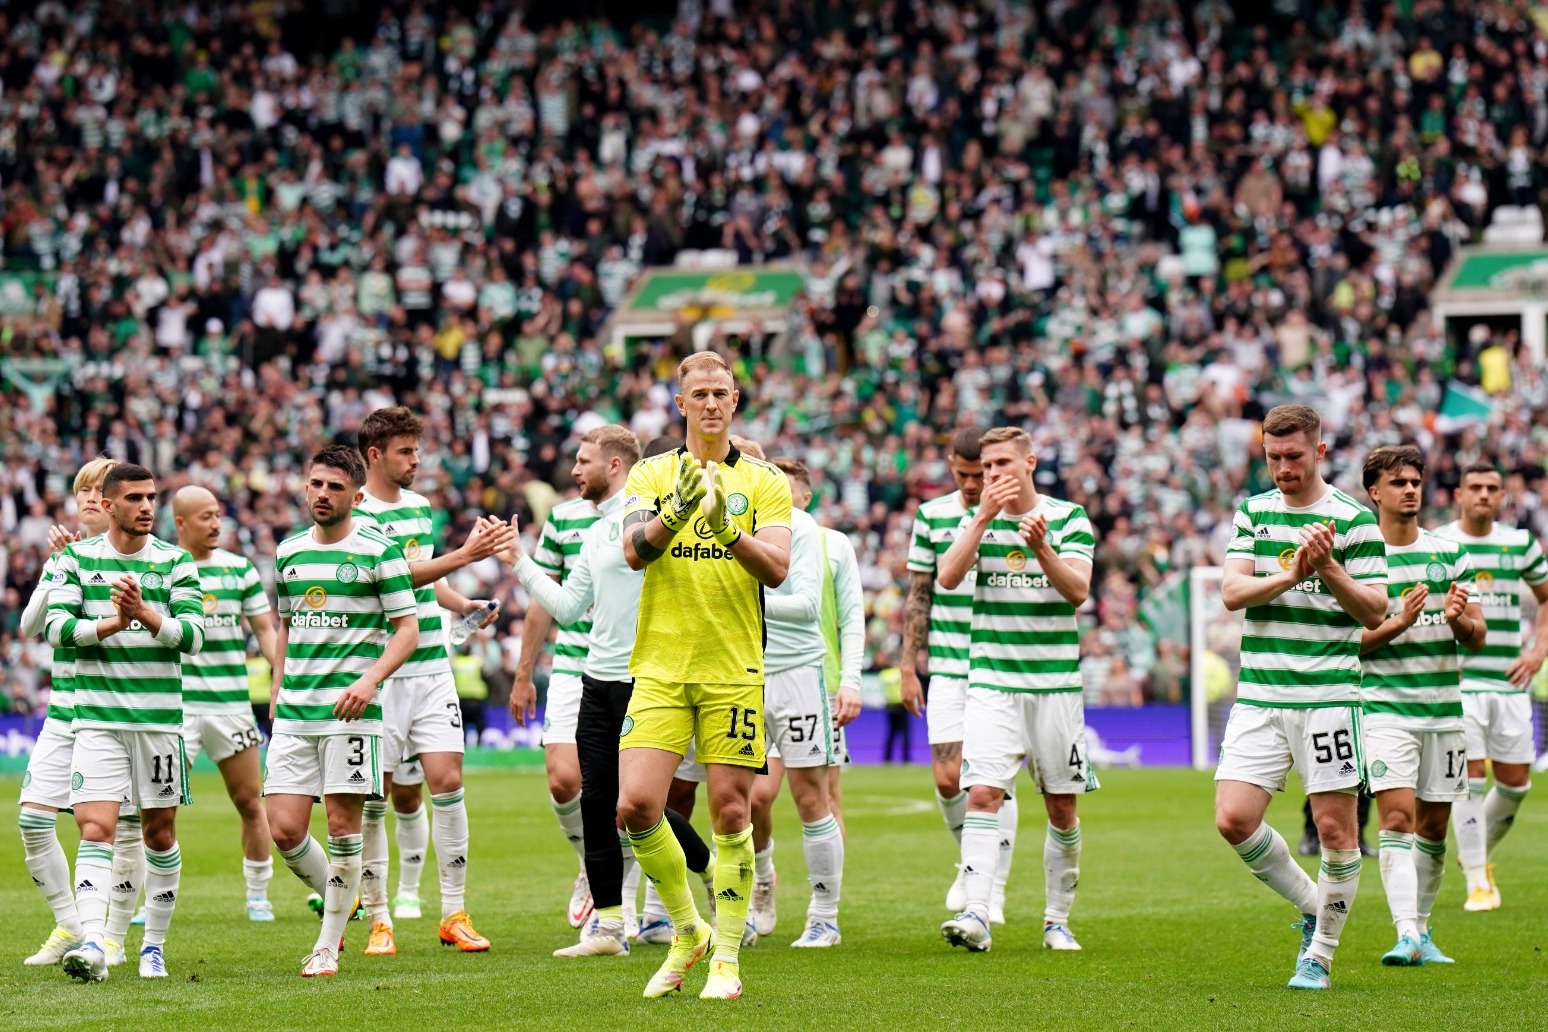 Celtic maintain the advantage in title race after Parkhead draw with Rangers 